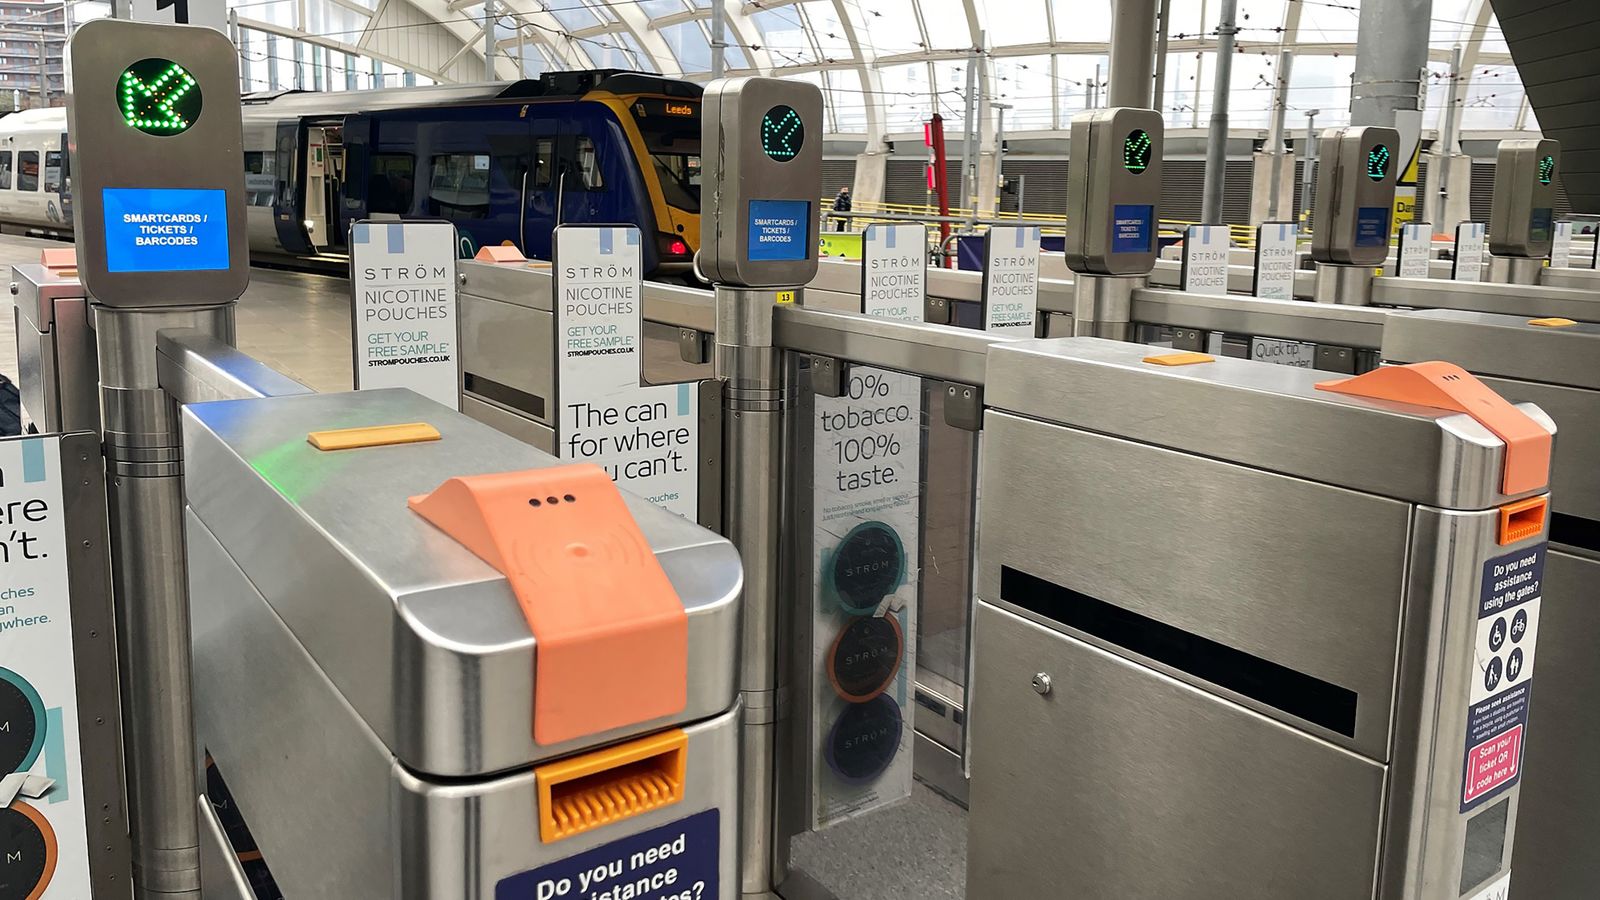 New technology to catch train fare dodgers to be deployed in 'known hotspots' across Northern network